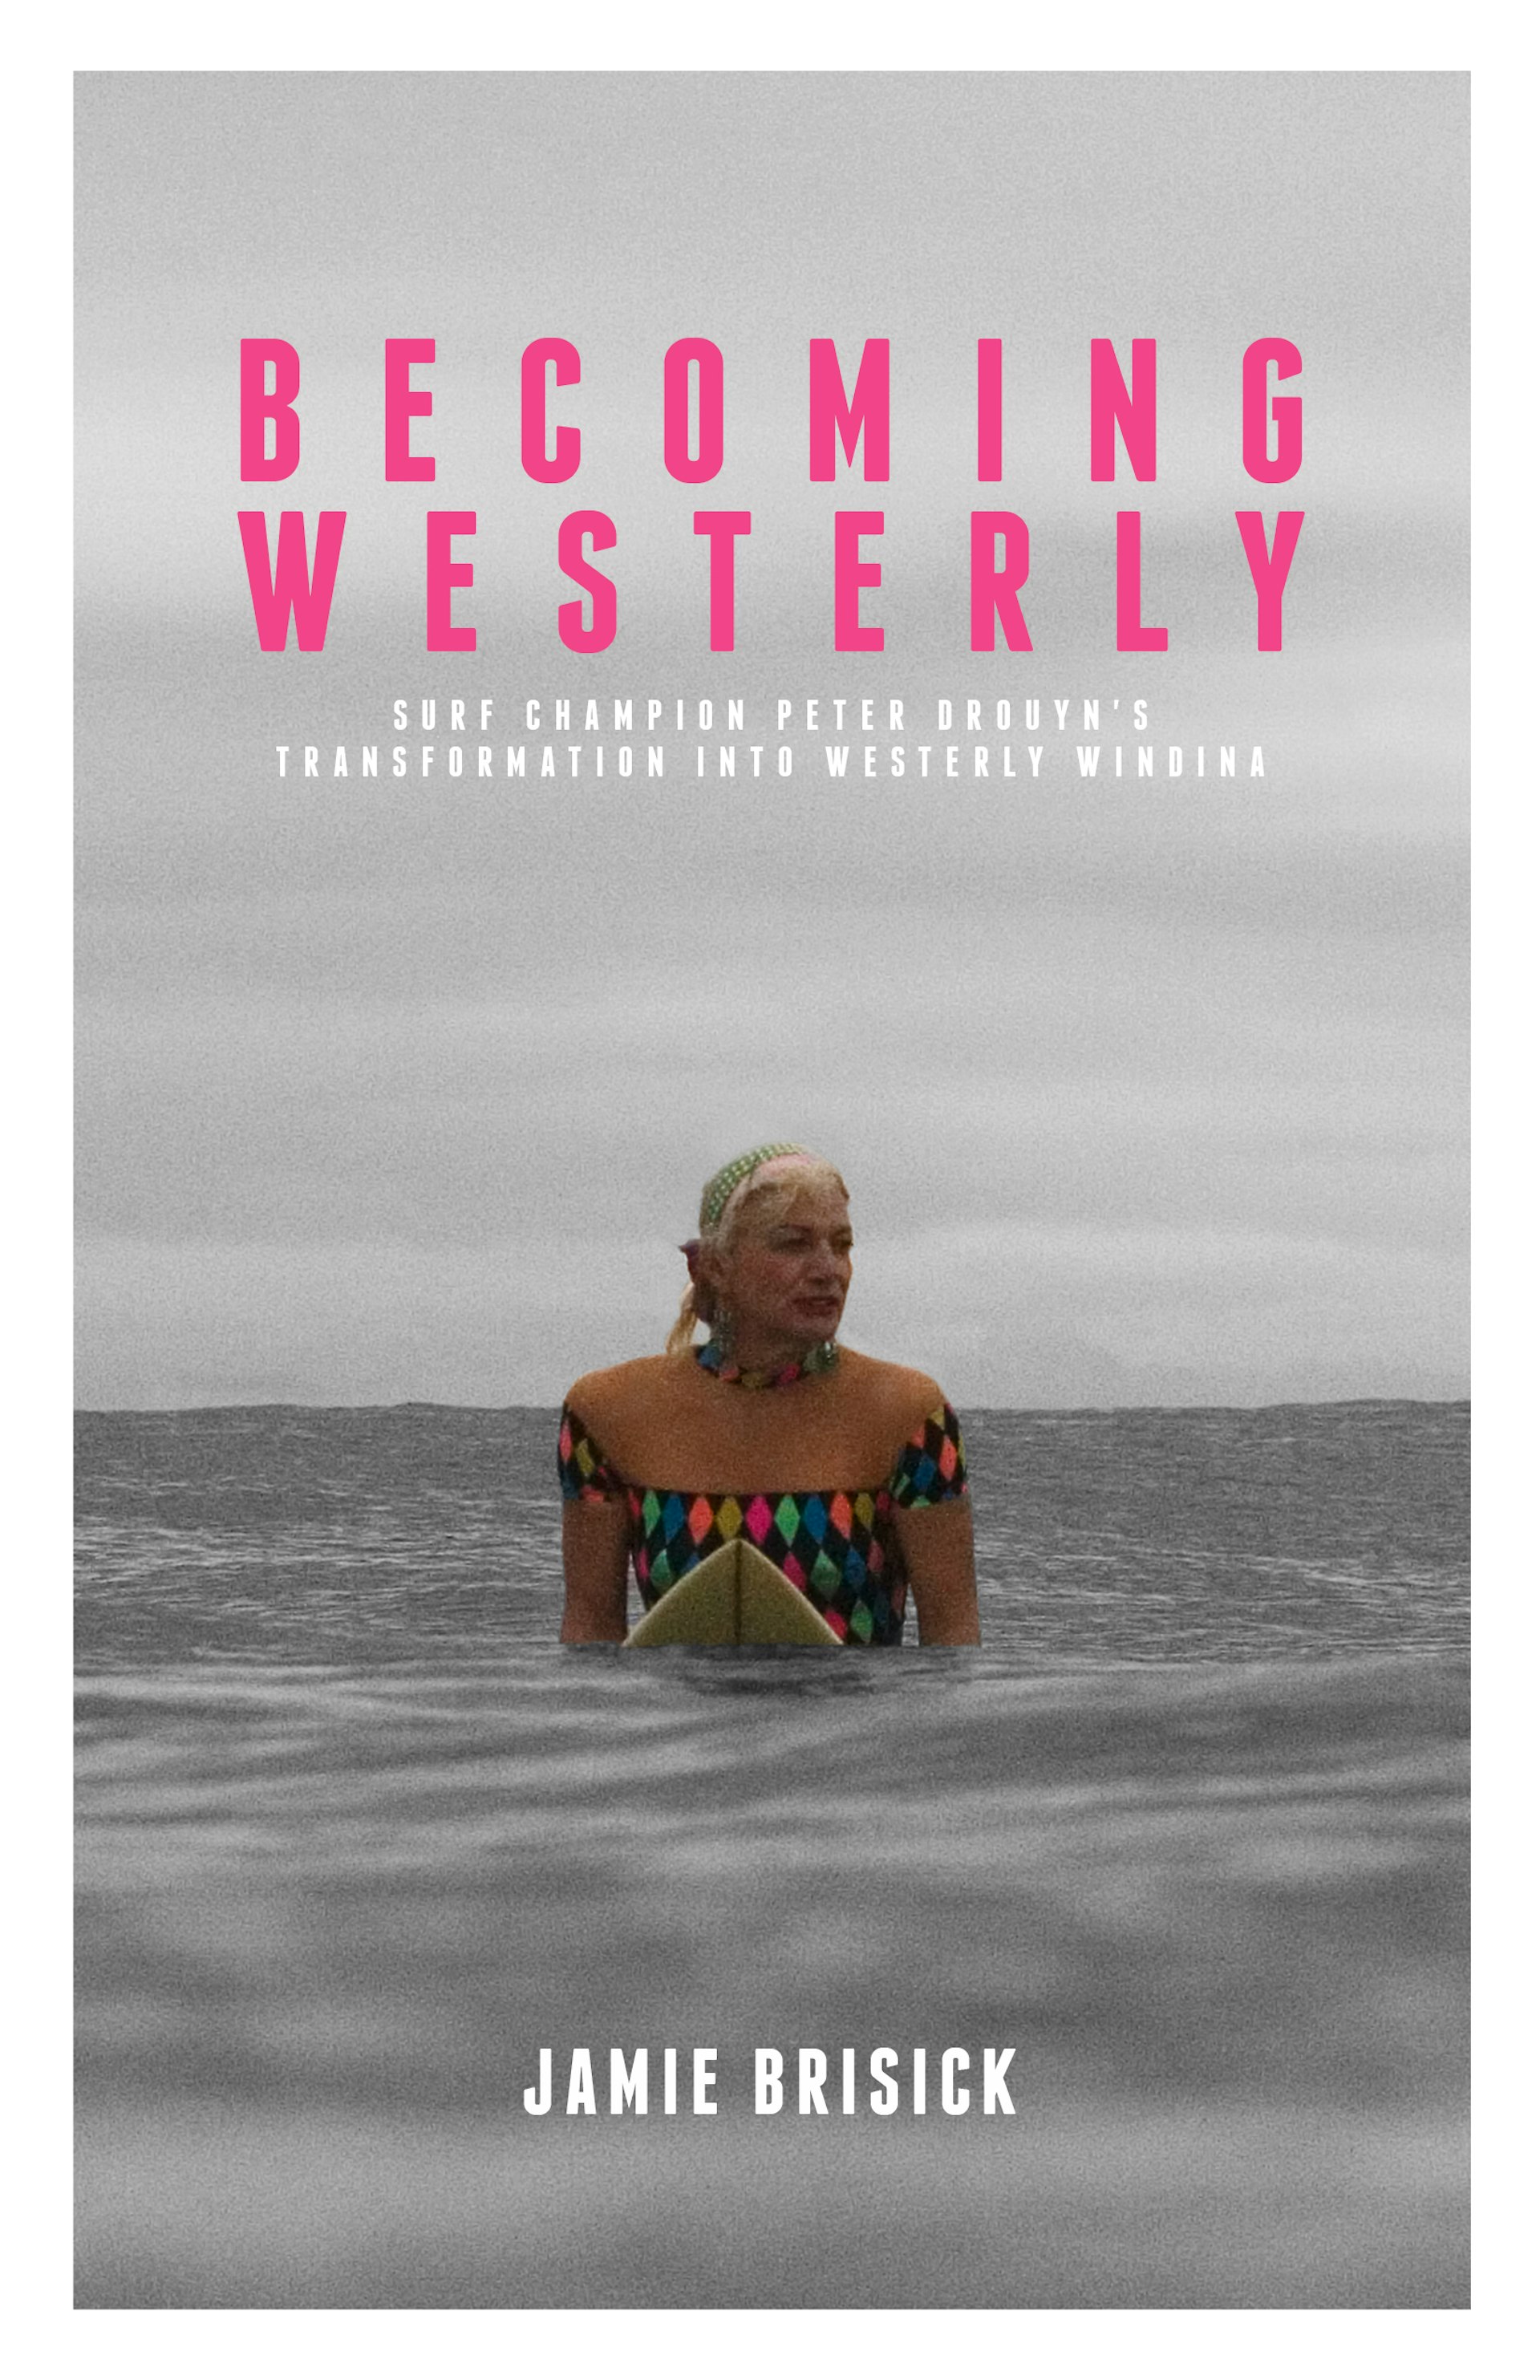 BecomingWesterlycover